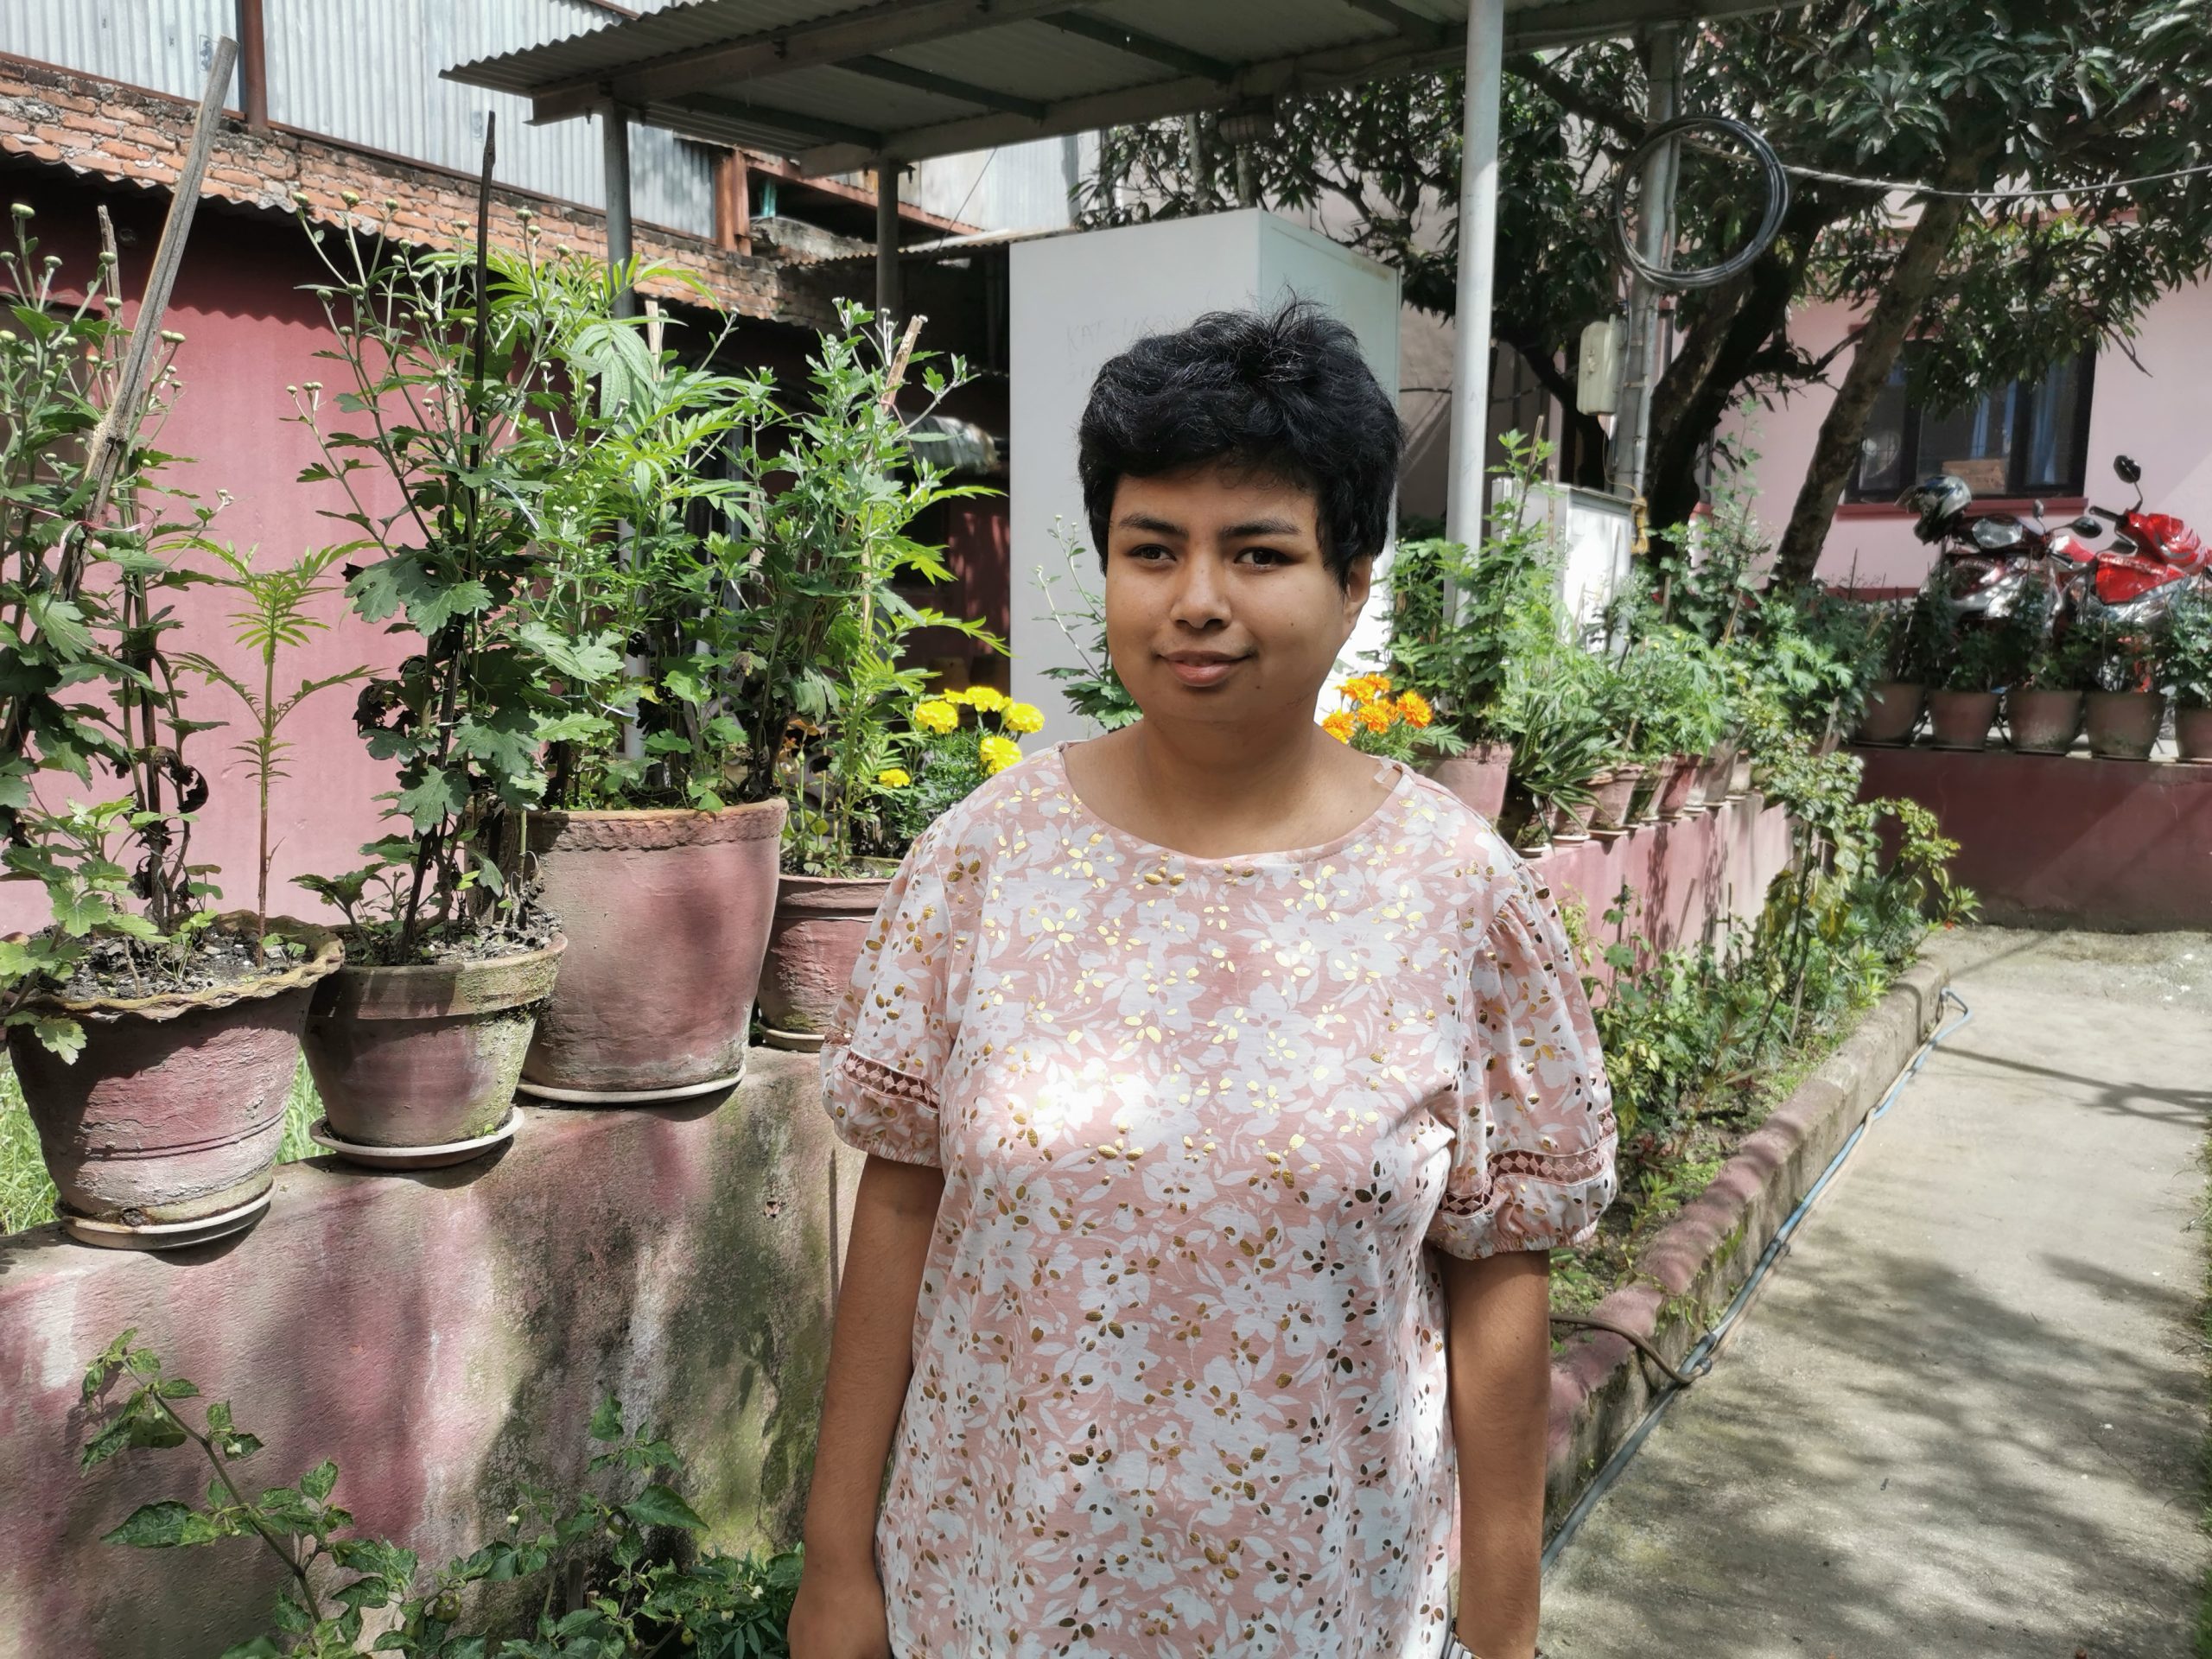 Ayushma is standing in a garden with green potted plants behind her, she is wearing a pink sweater and short black hair